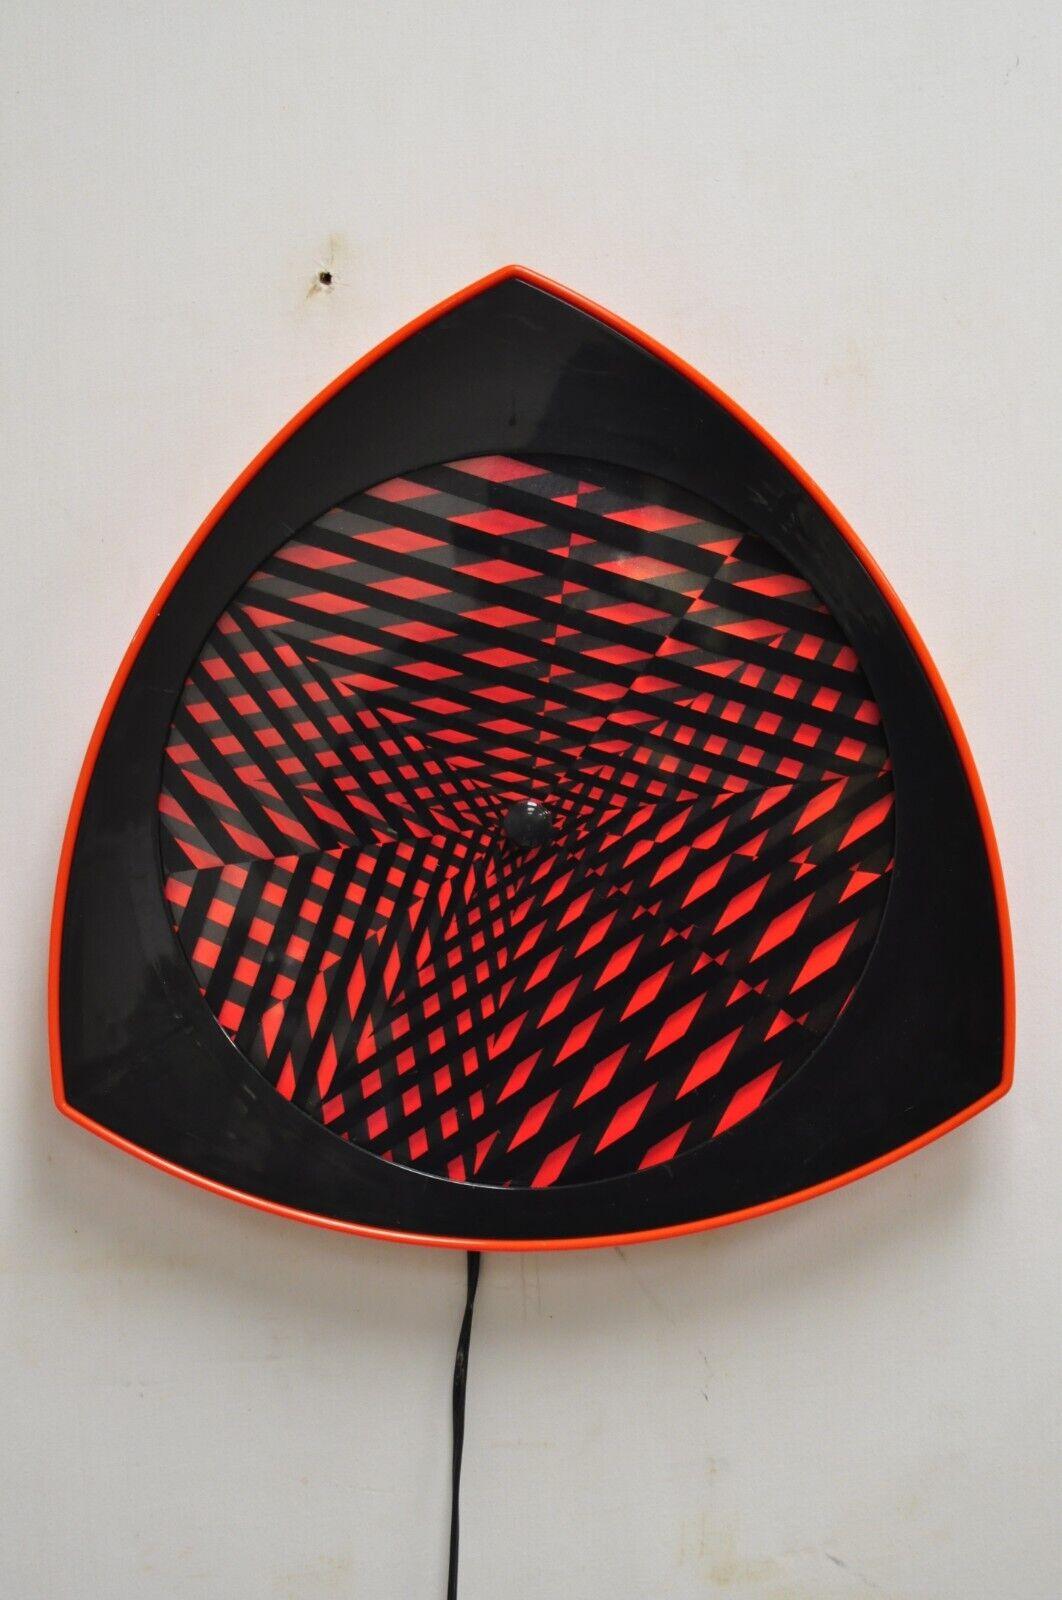 Vintage 1996 Rabbit Tanaka Lumaseries CyberSpace Red Kinetic Wall Art Sculpture. Item features a unique rotating form with changing optic geometric psychedelic patterns, original stamp, very nice vintage item. Circa Late 20th Century, 1996.